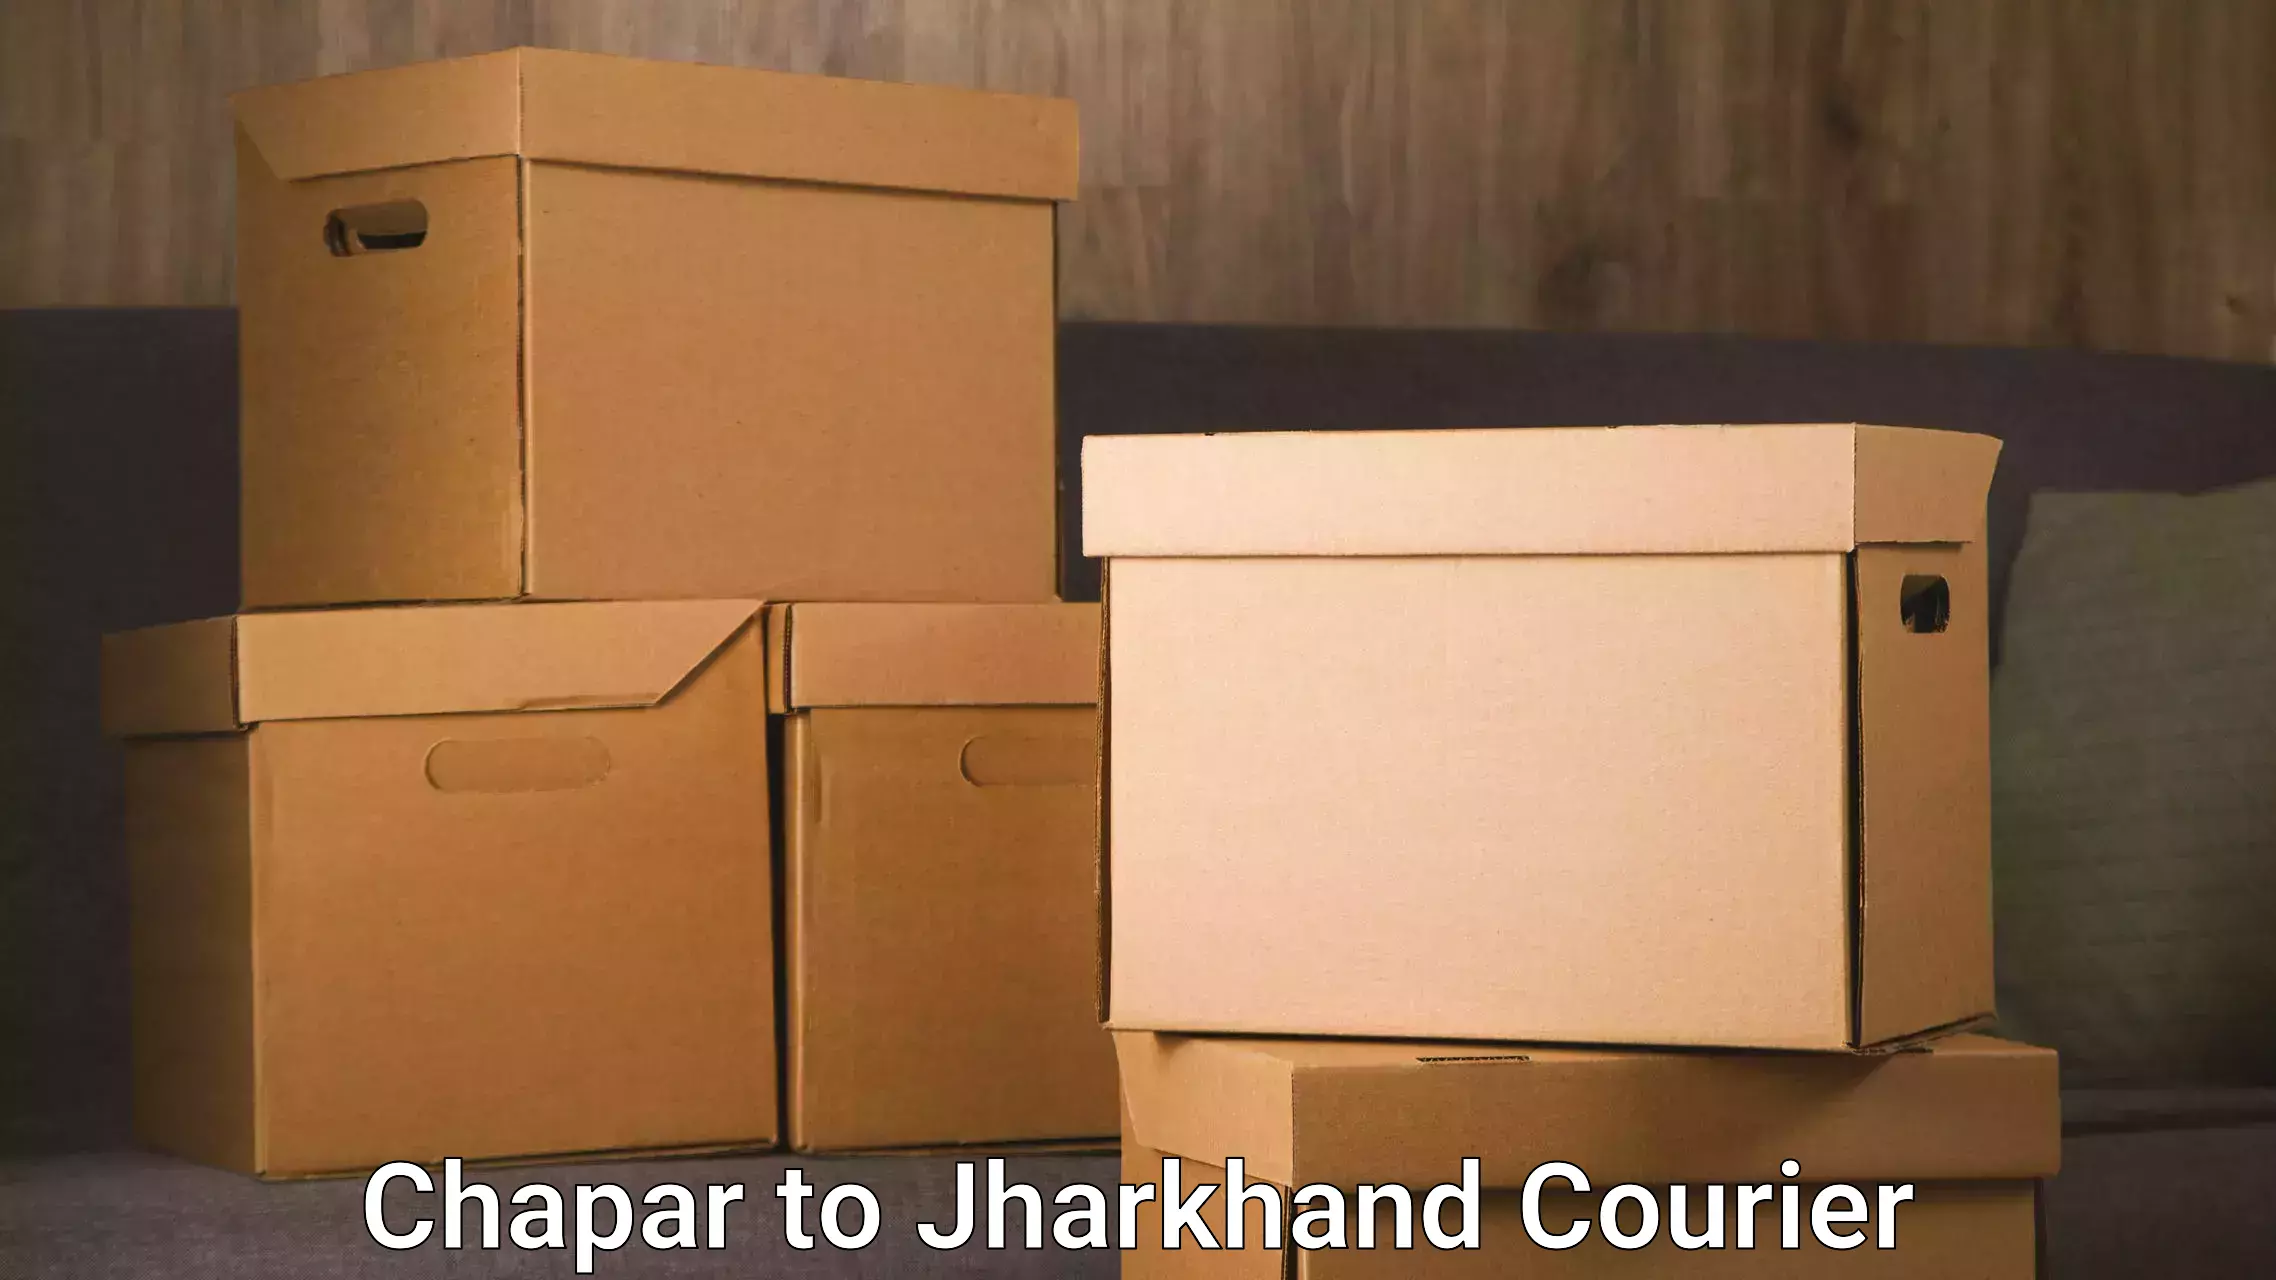 Global shipping networks in Chapar to Jamshedpur